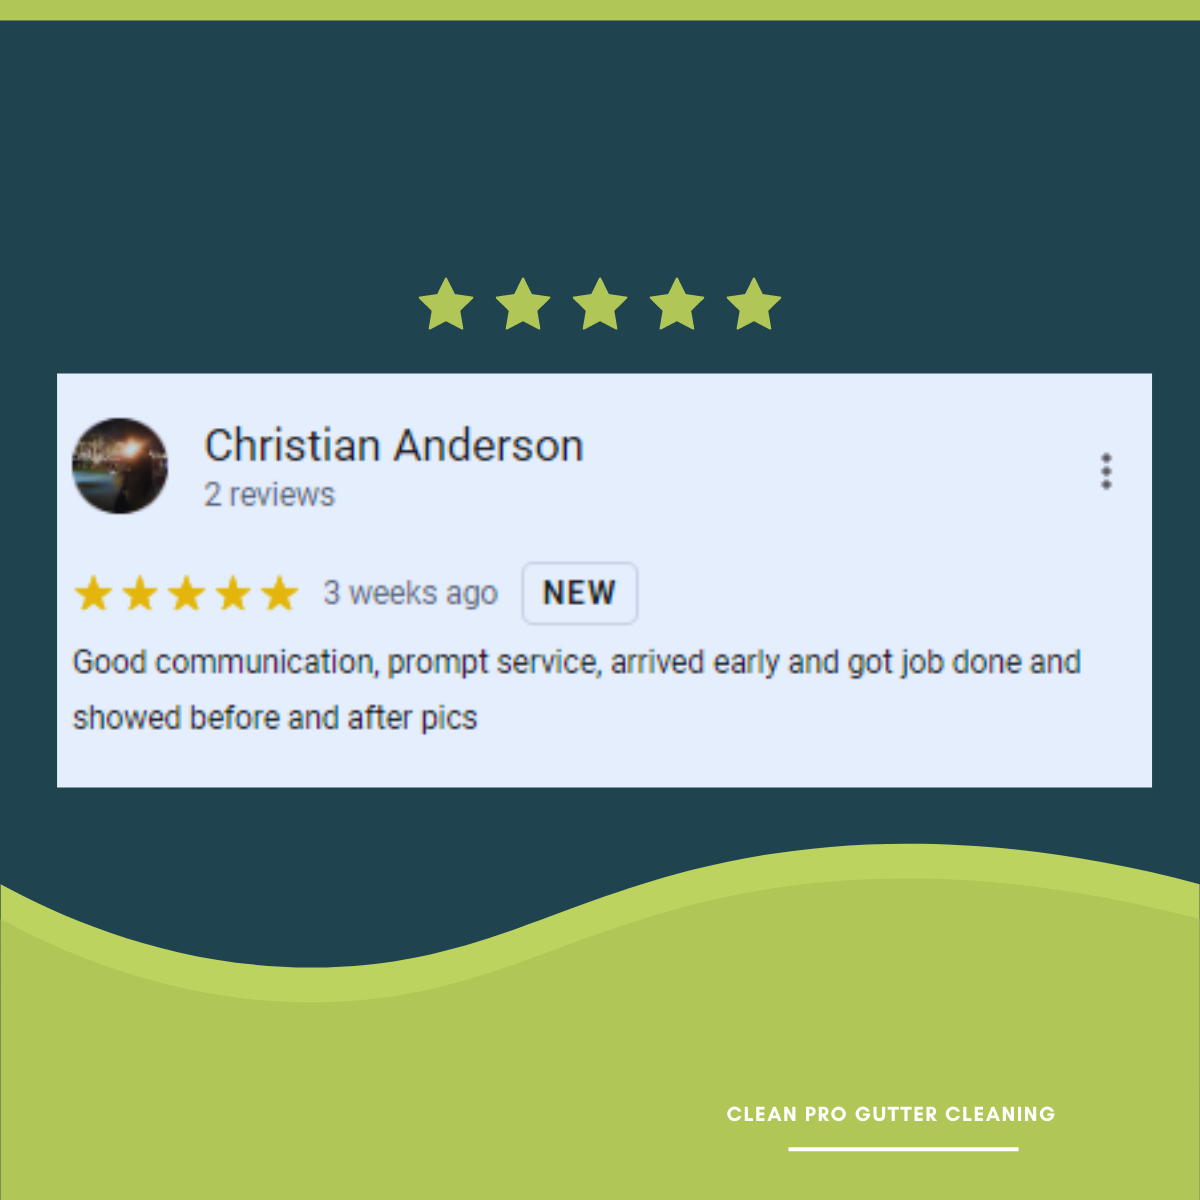 Christian from Flint gives us a 5 star review for a recent gutter cleaning service.